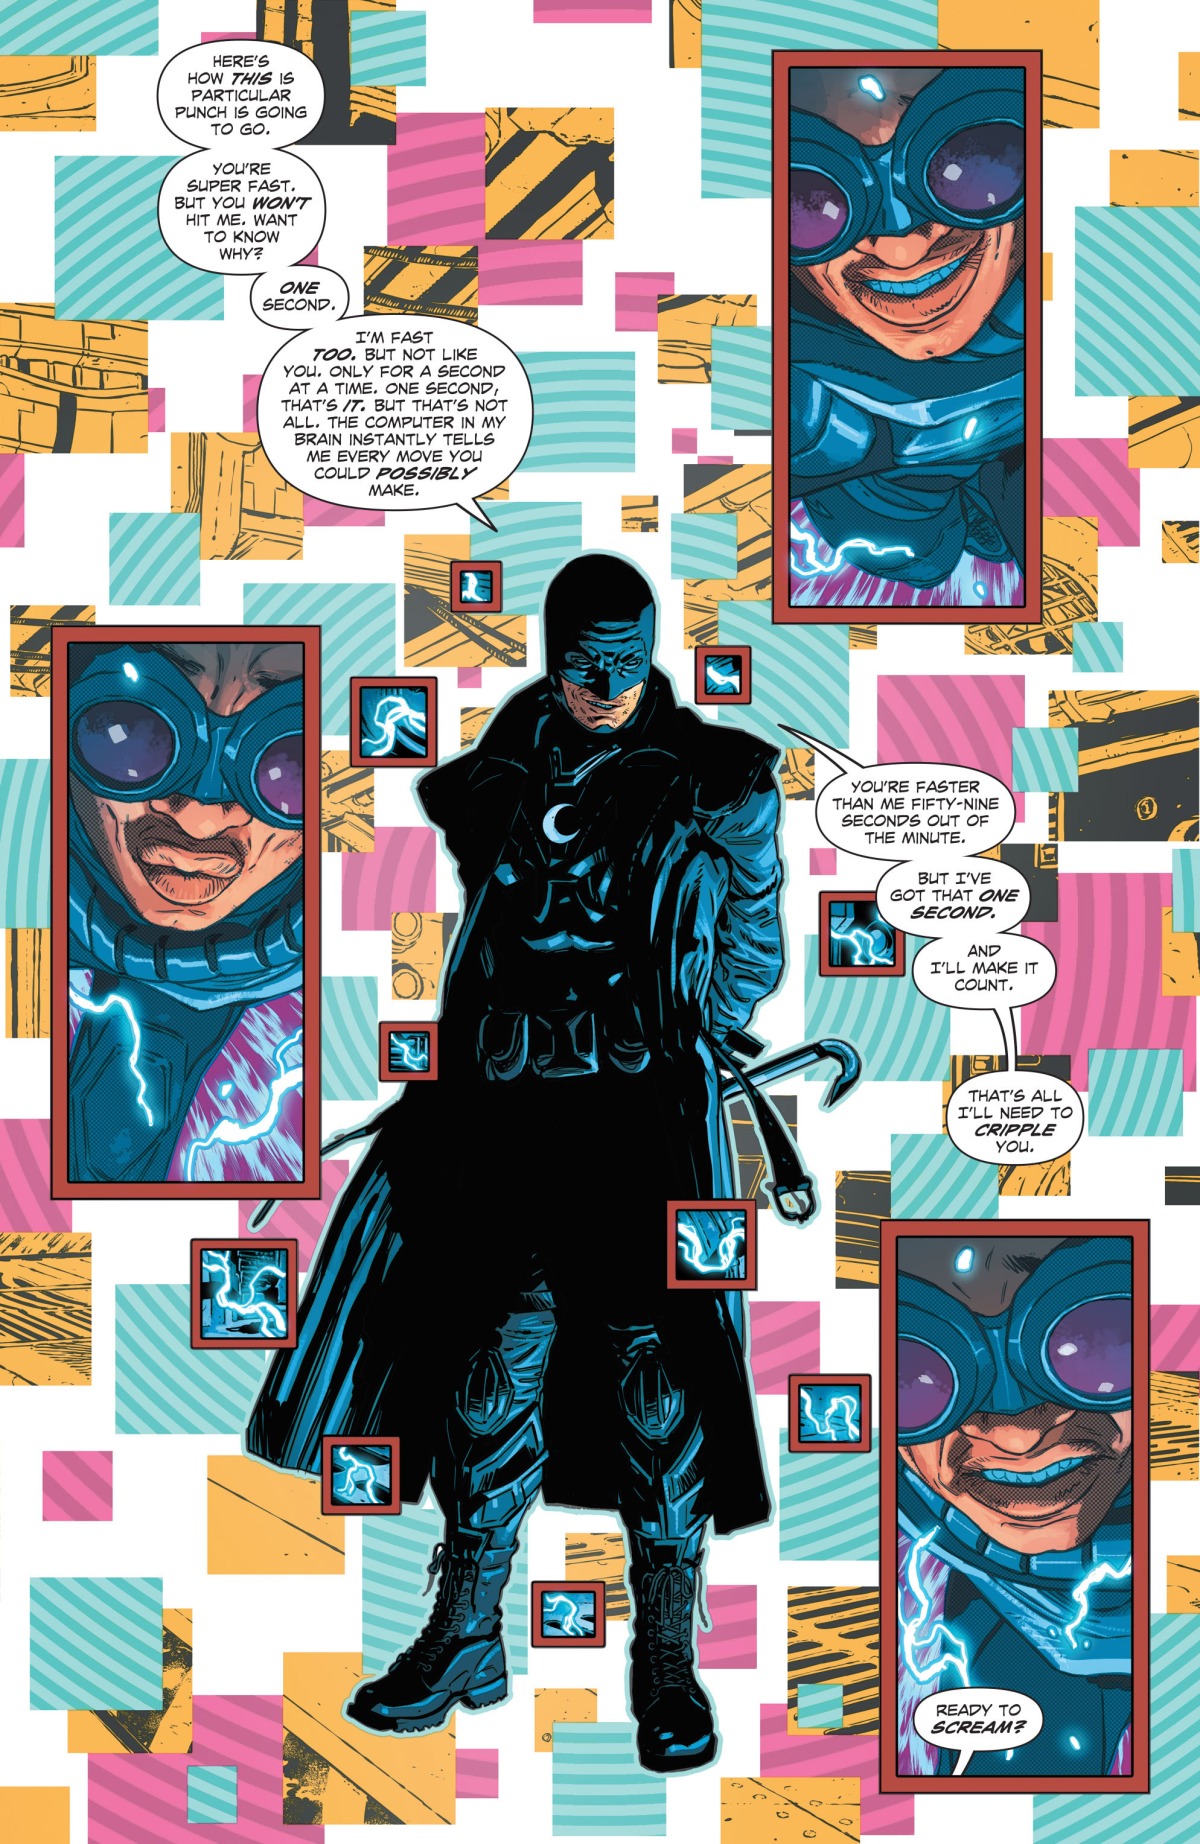 Midnighter explains why he needs only one second…